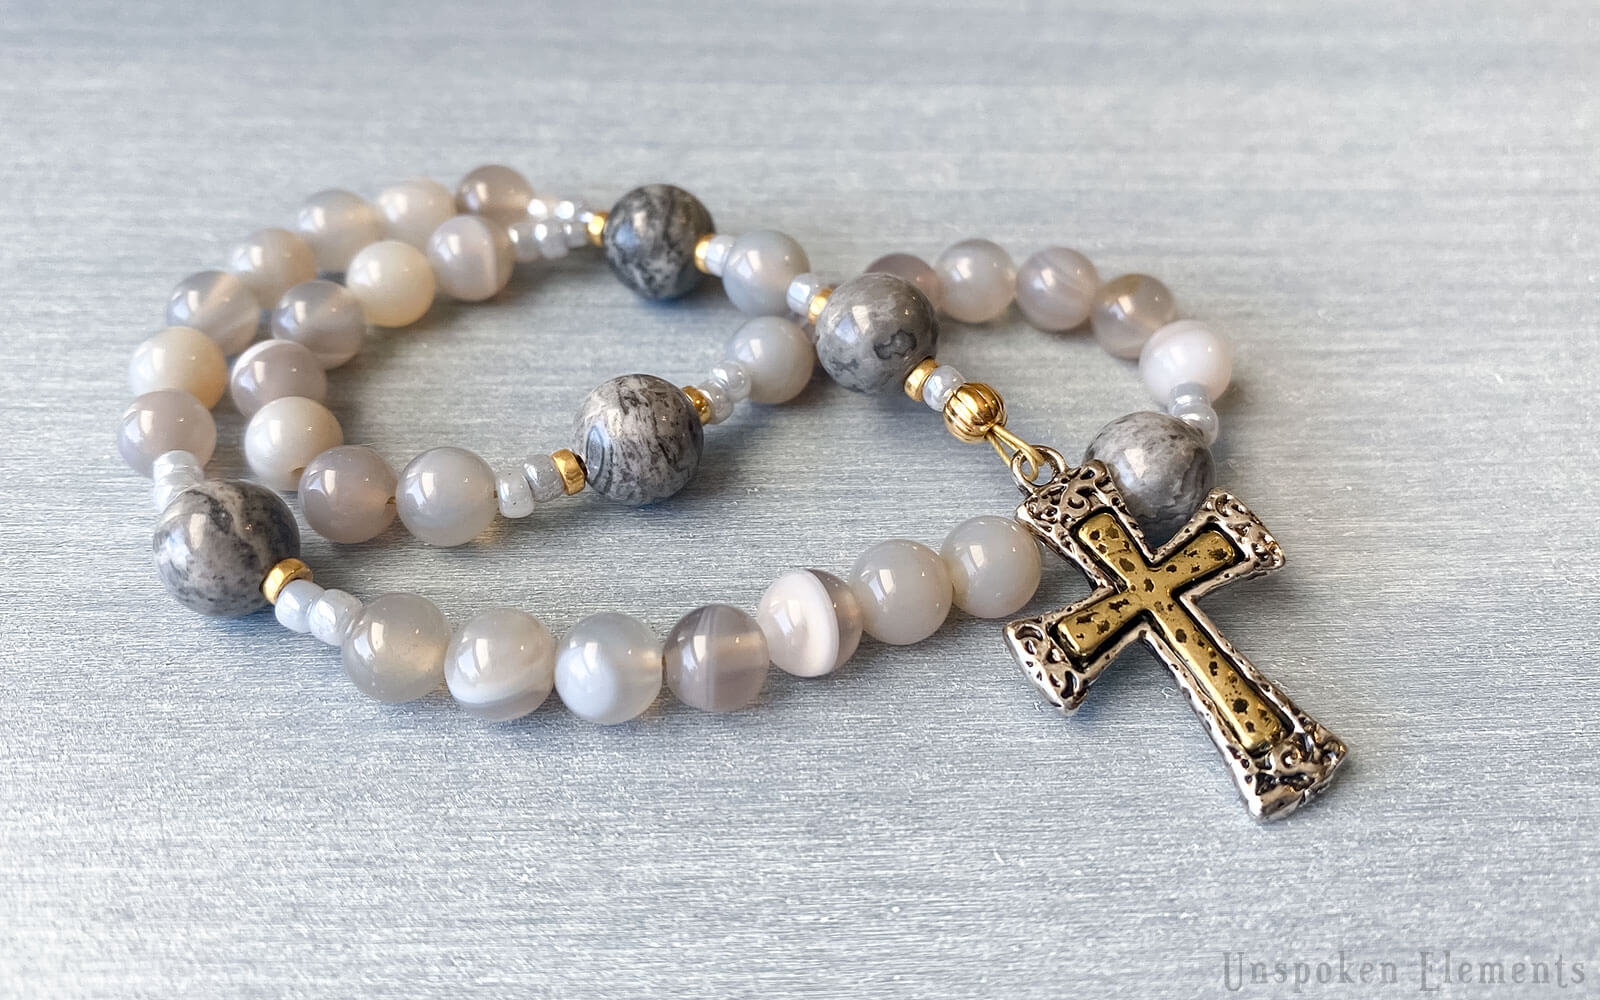 Anglican Prayer Beads by Unspoken Elements